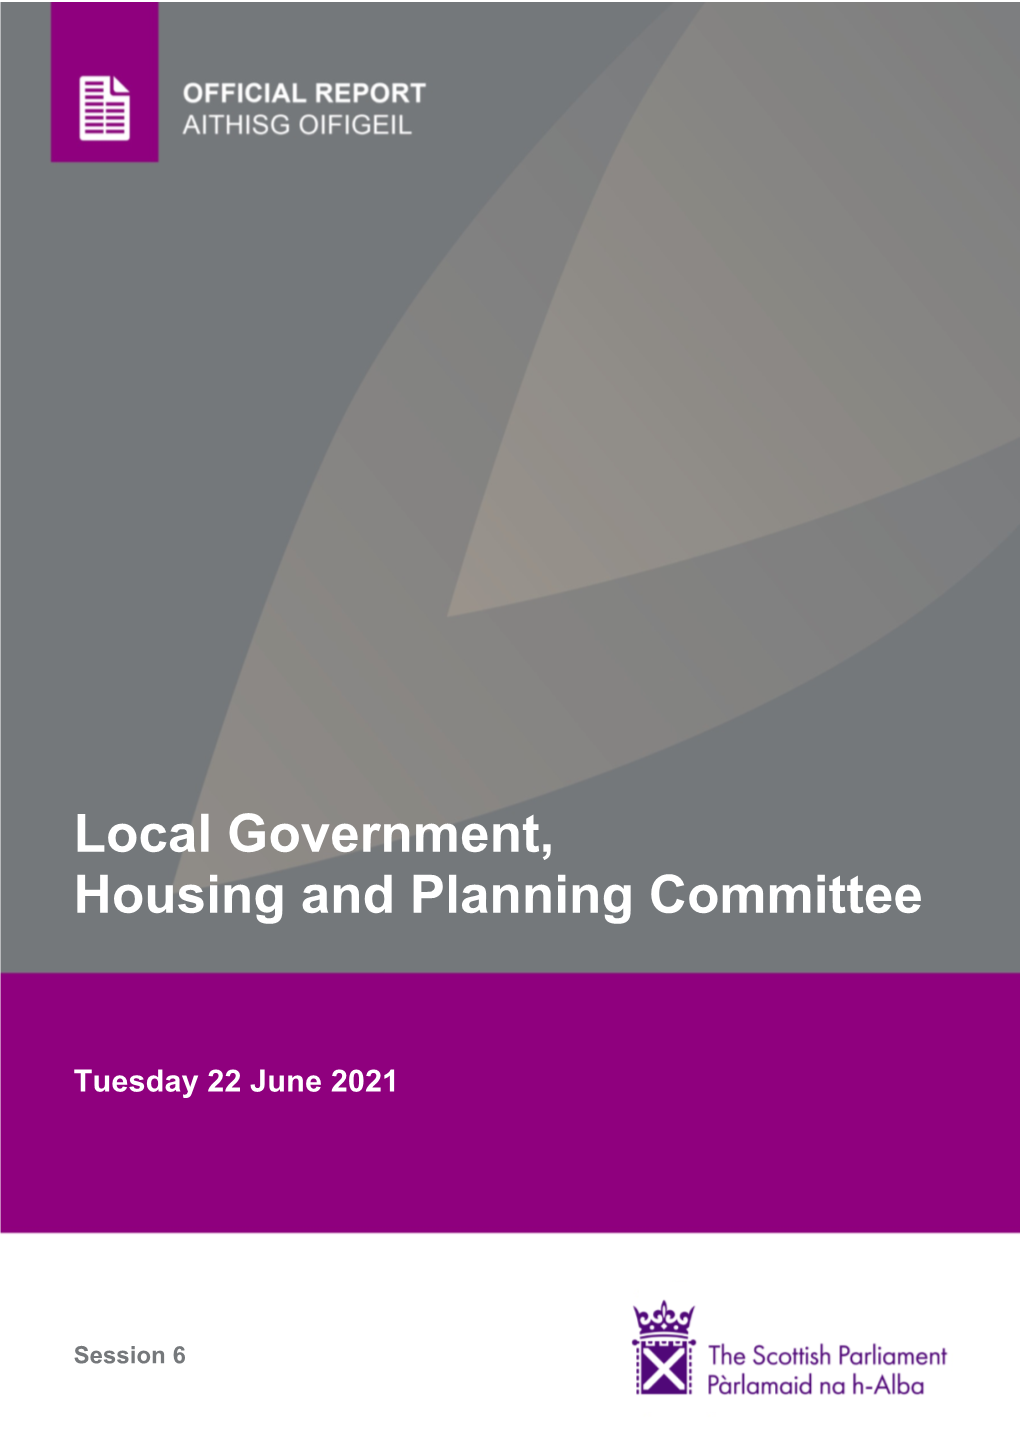 Local Government, Housing and Planning Committee